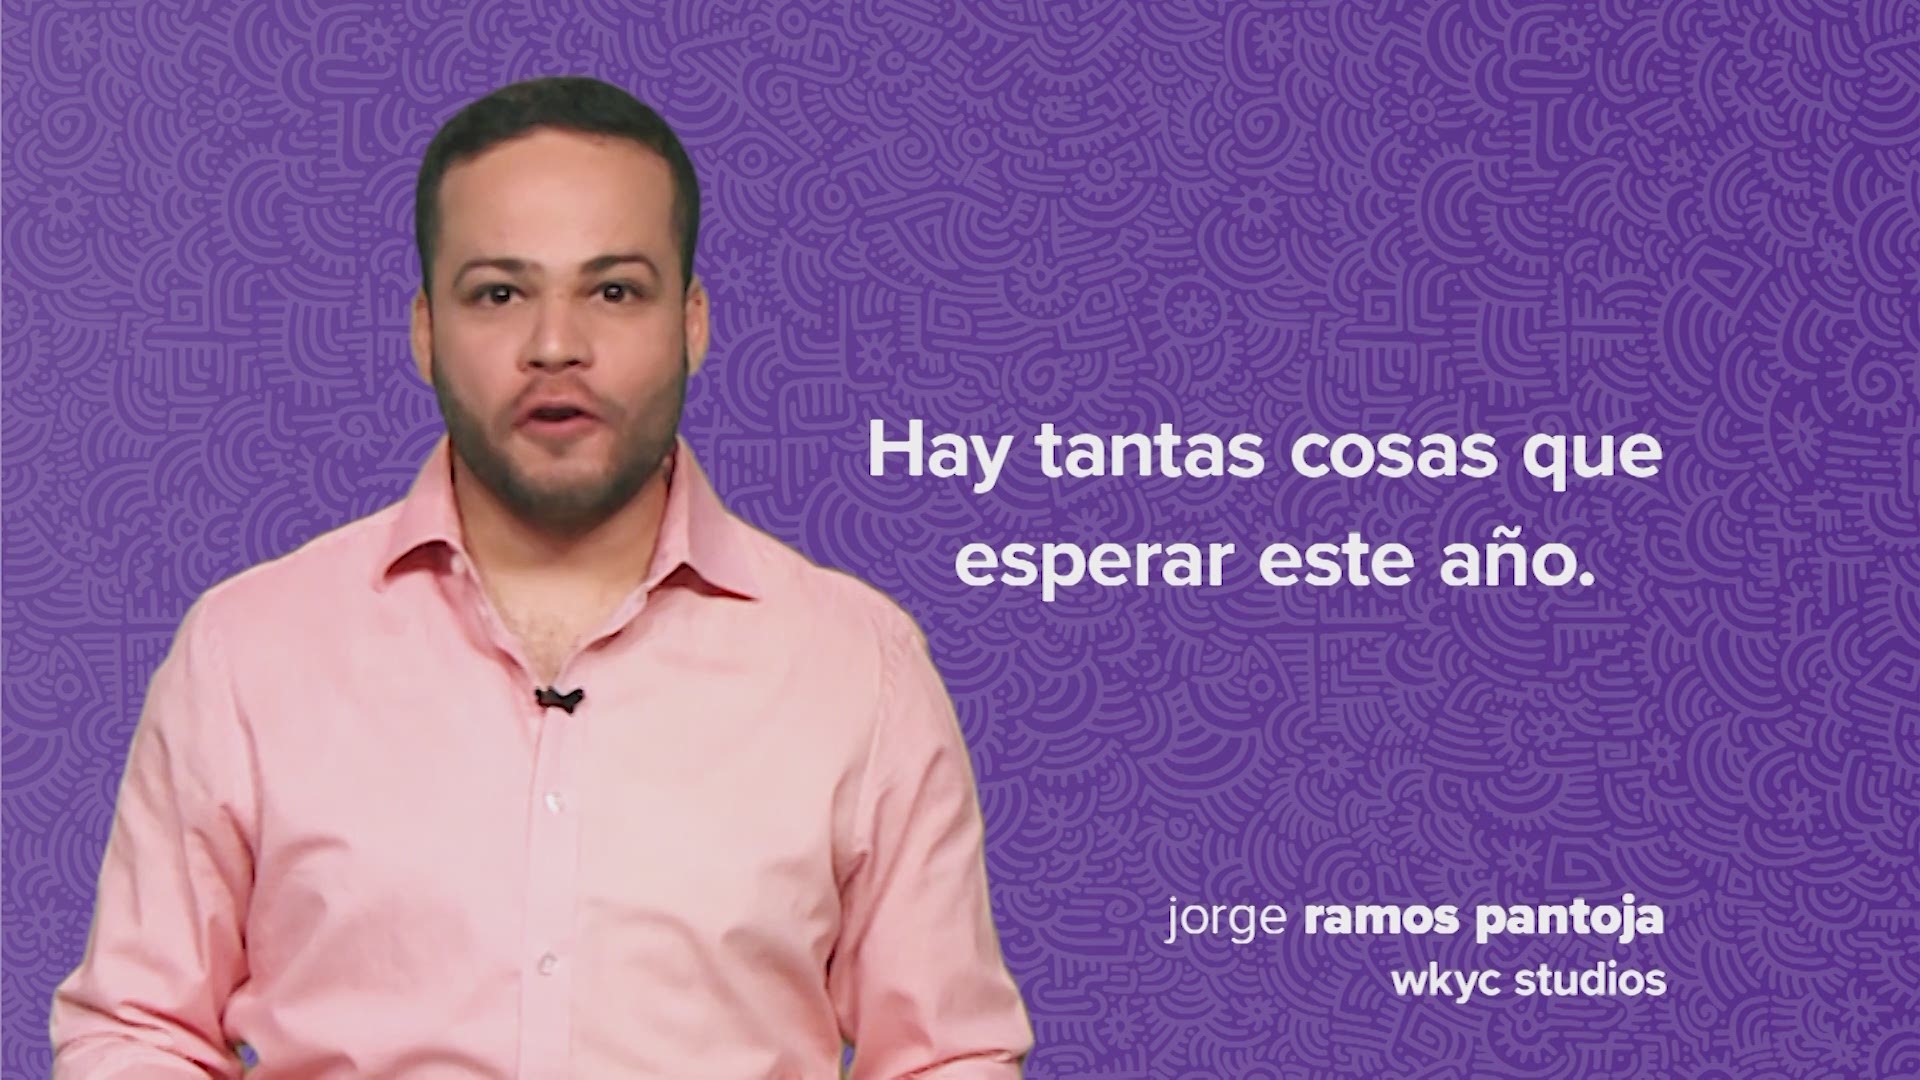 A bilingual public service announcement shares an important message aimed at Northeast Ohio’s Latino community.